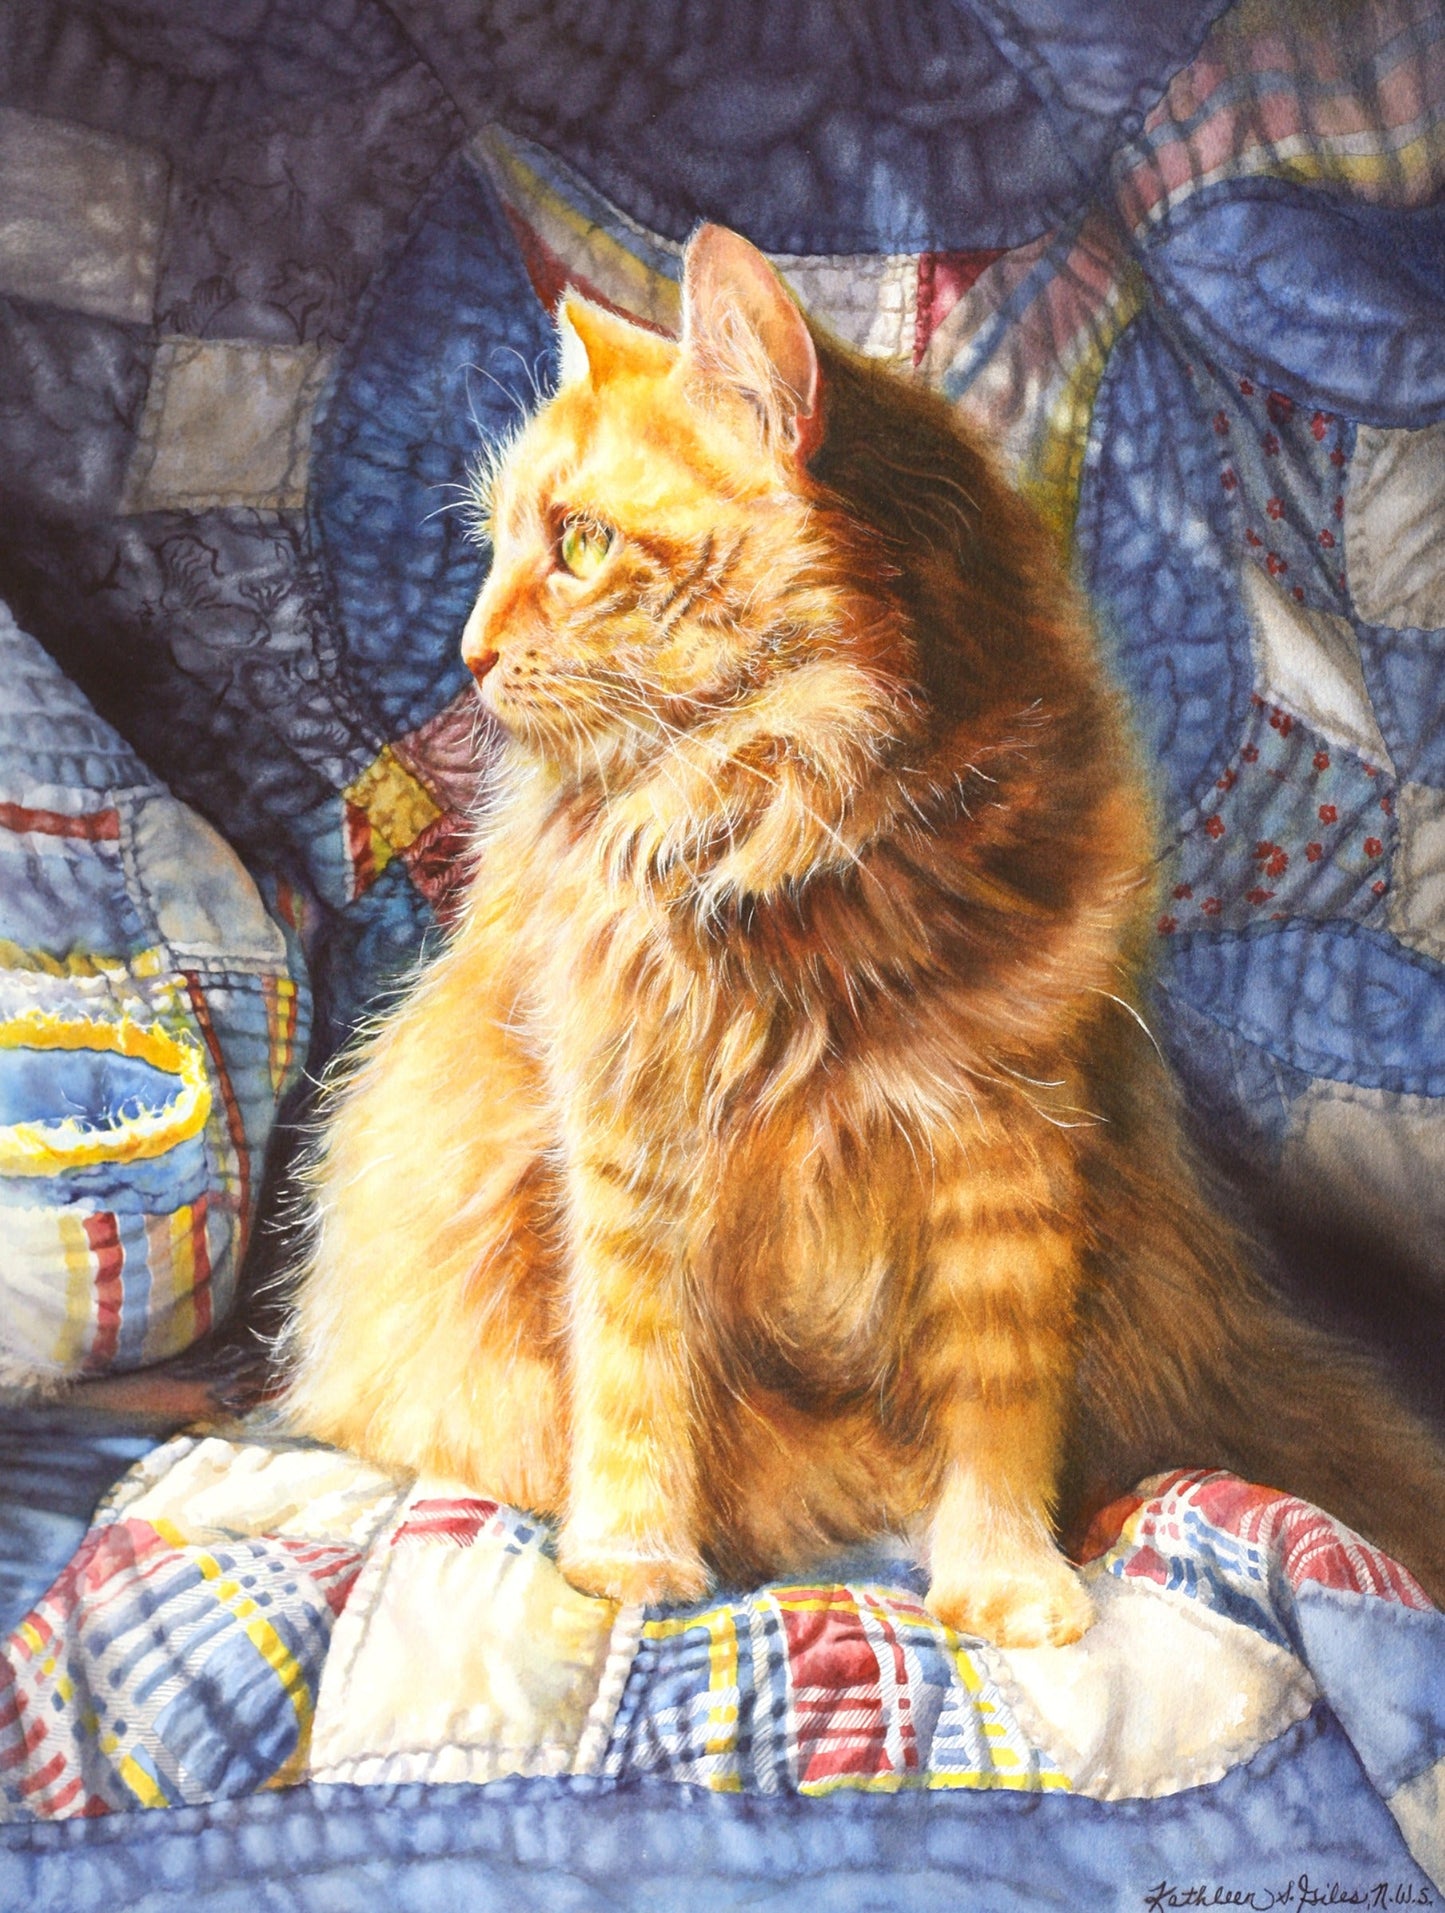 Original Watercolor Painting of Cat on a Quilt